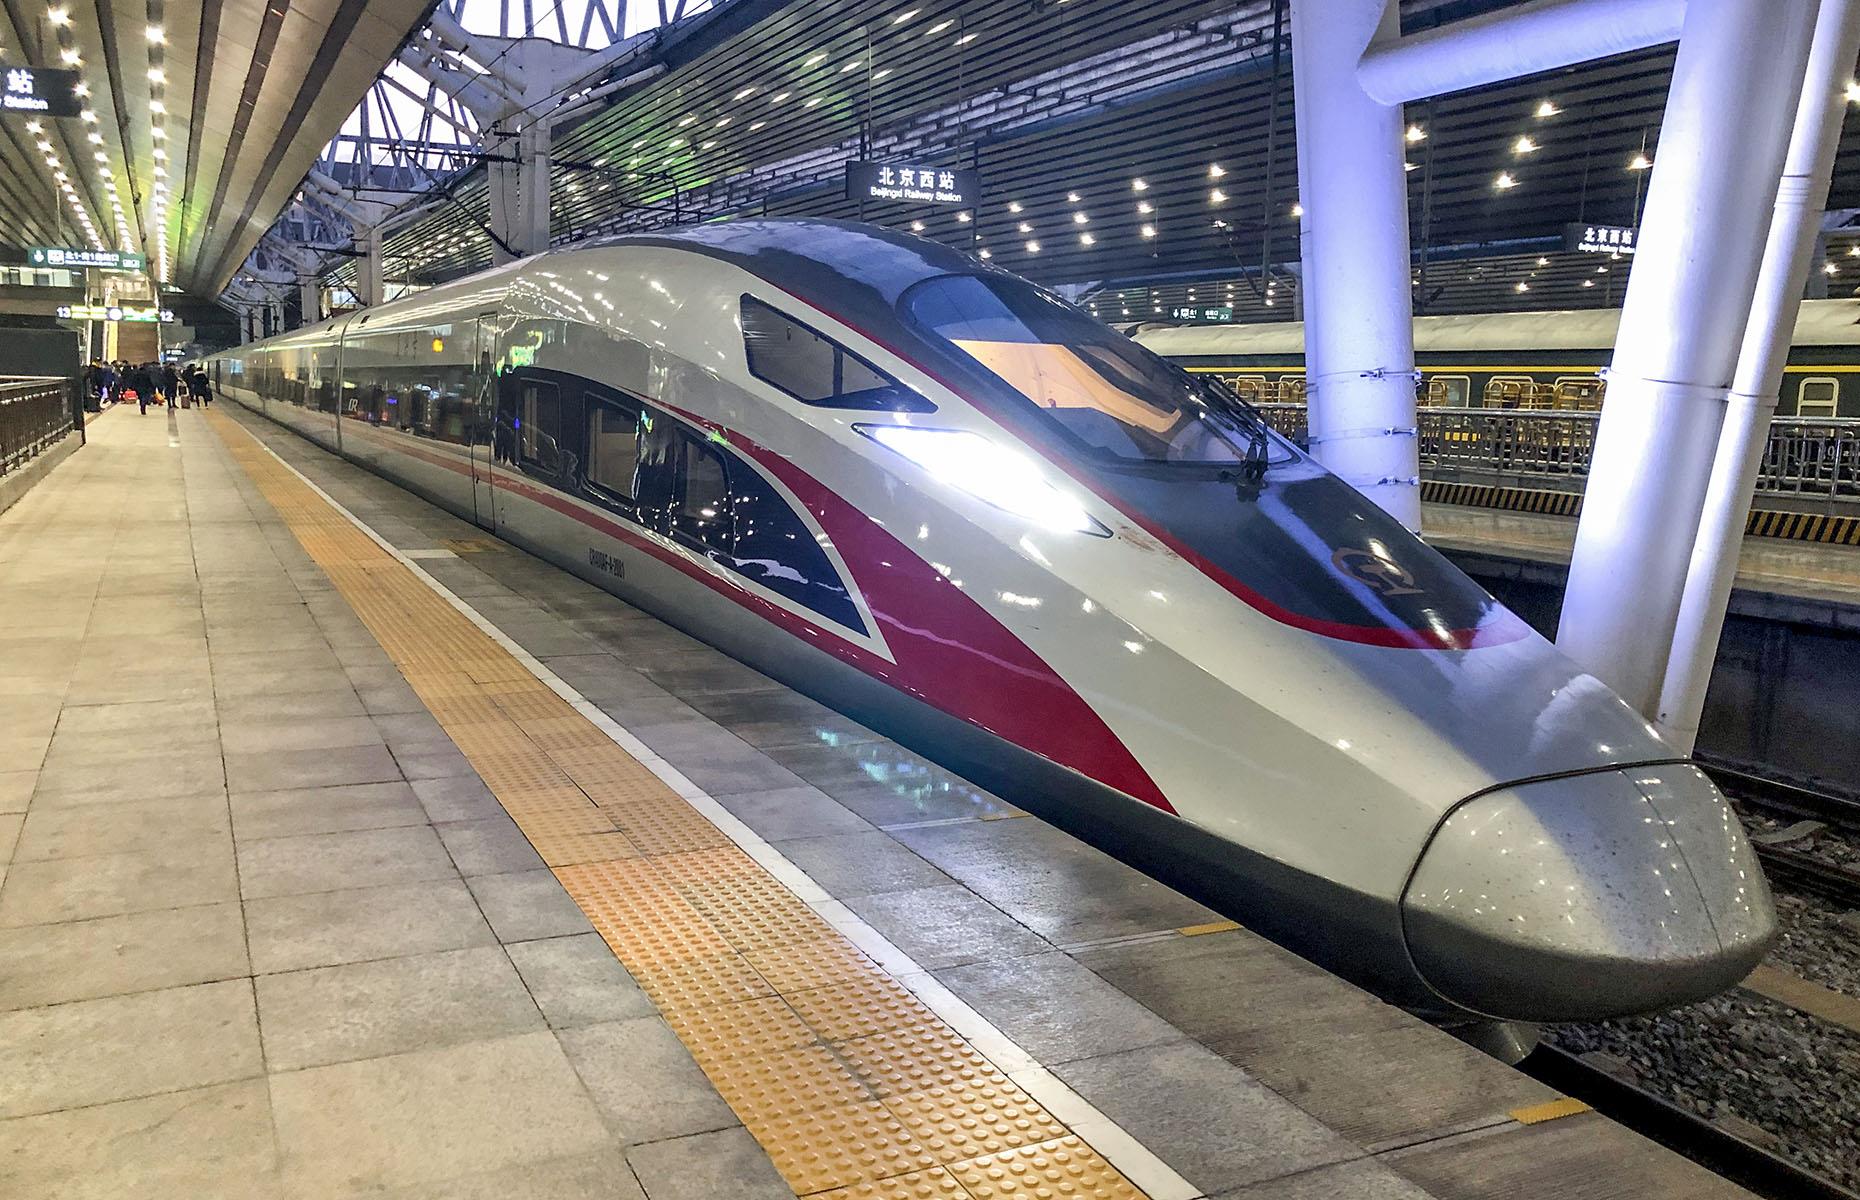 <p>In 2011, China overtook Japan as the country with the highest number of high-speed rail (HSR) passengers – a remarkable feat for a country that didn't have any high-speed rail lines at the start of the century. At its peak in 2019, 2.29 billion people rode China's HSR rails. Today, China boasts 26,000 miles of high-speed tracks, which is longer than the circumference of the Earth. This aerodynamic G20 train, pictured, travels along the Beijing to Hong Kong line, which opened in 2018. Its sleek body and elongated nose show just how much trains have developed over the decades.</p>